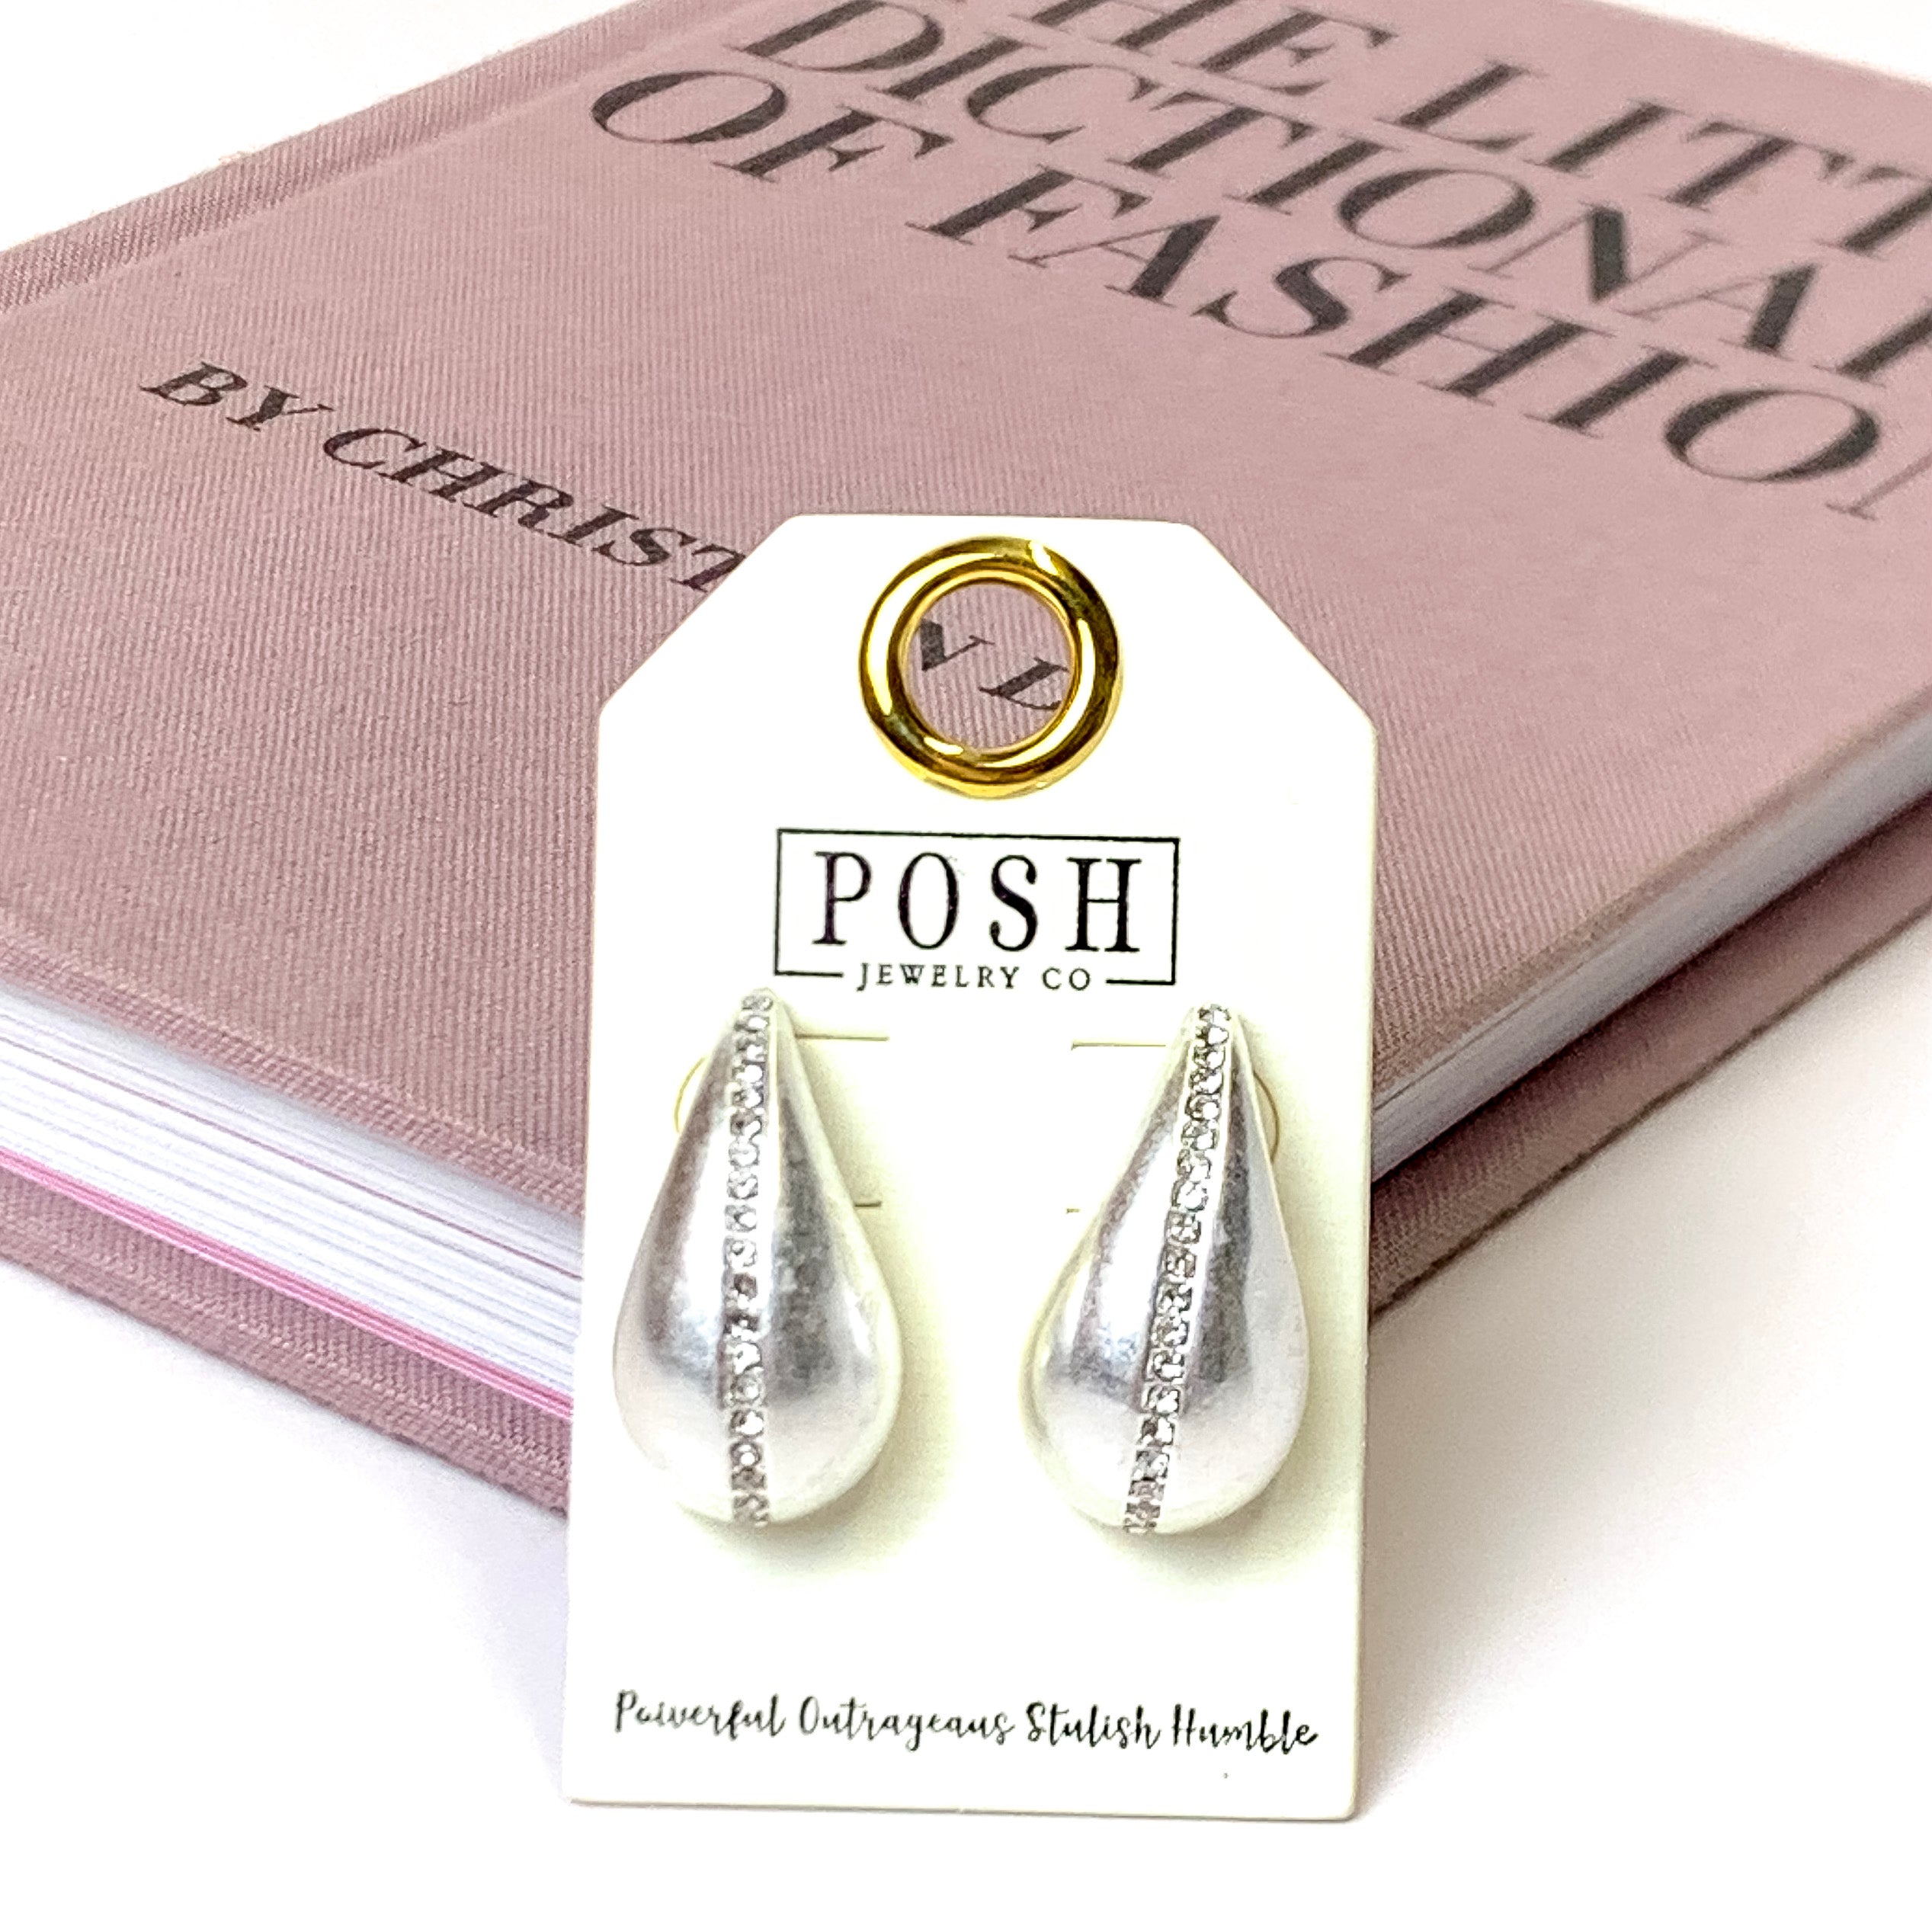 Posh by Pink Panache | Rhinestone Accent Raindrop Post Earrings in Silver - Giddy Up Glamour Boutique